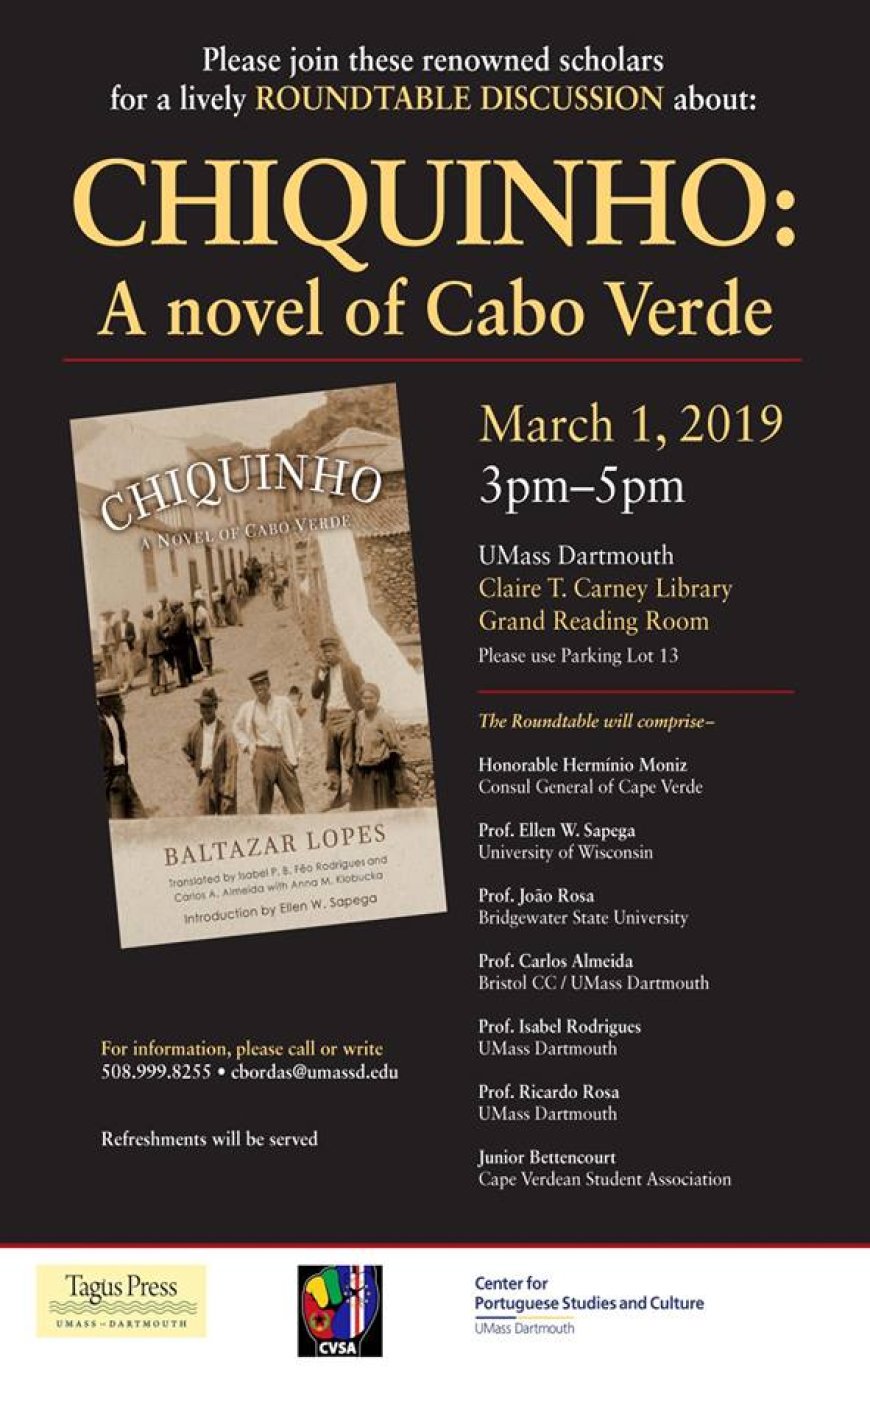 A distinguished roundtable panel to discuss Chiquinho: A Novel of Cabo Verde, 